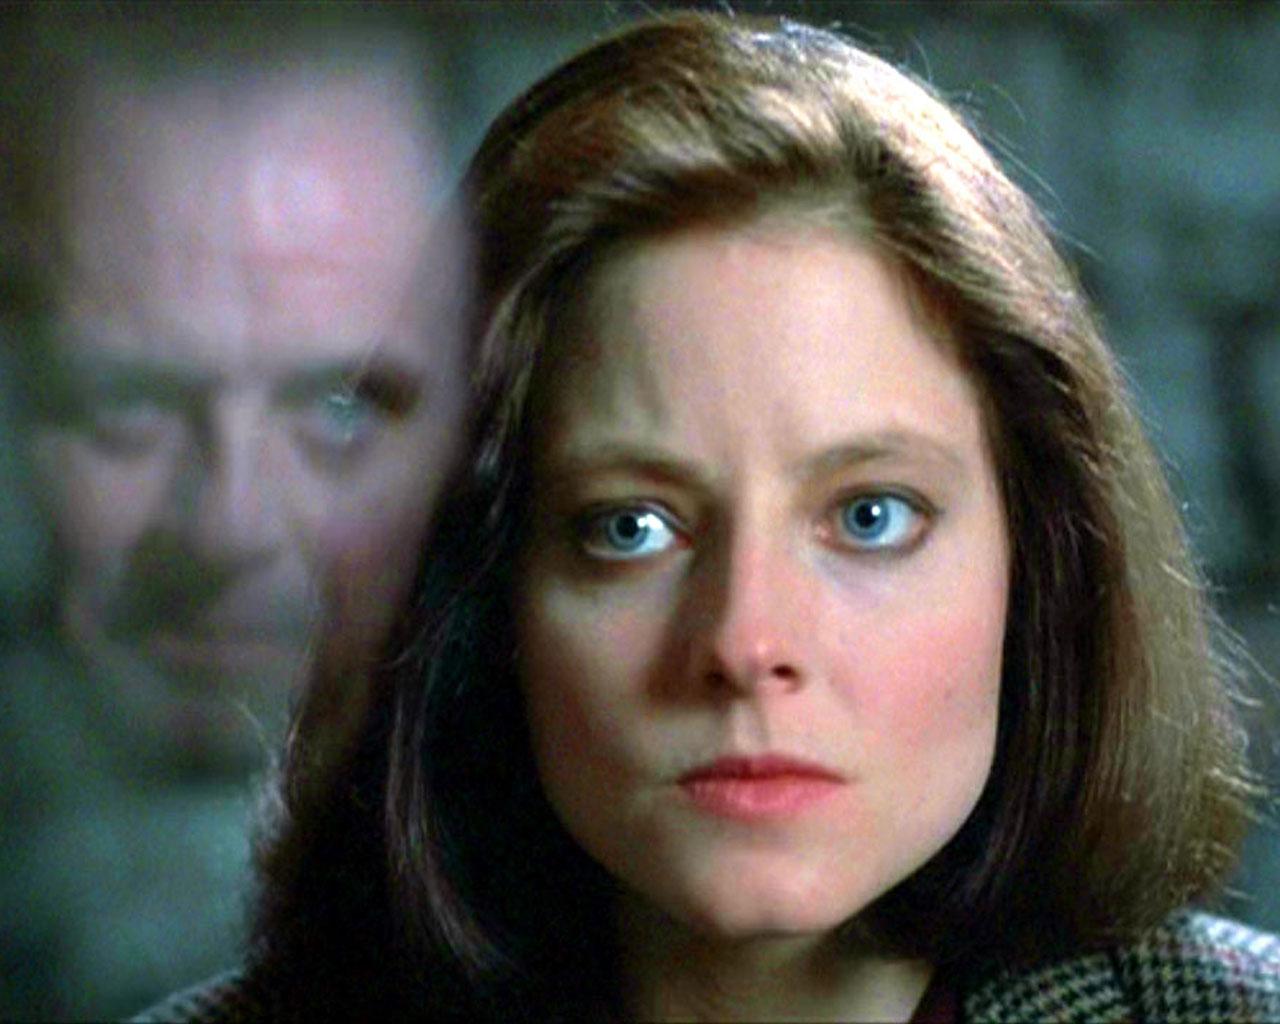 The Silence Of The Lambs Wallpaper #2 1280 x 1024 